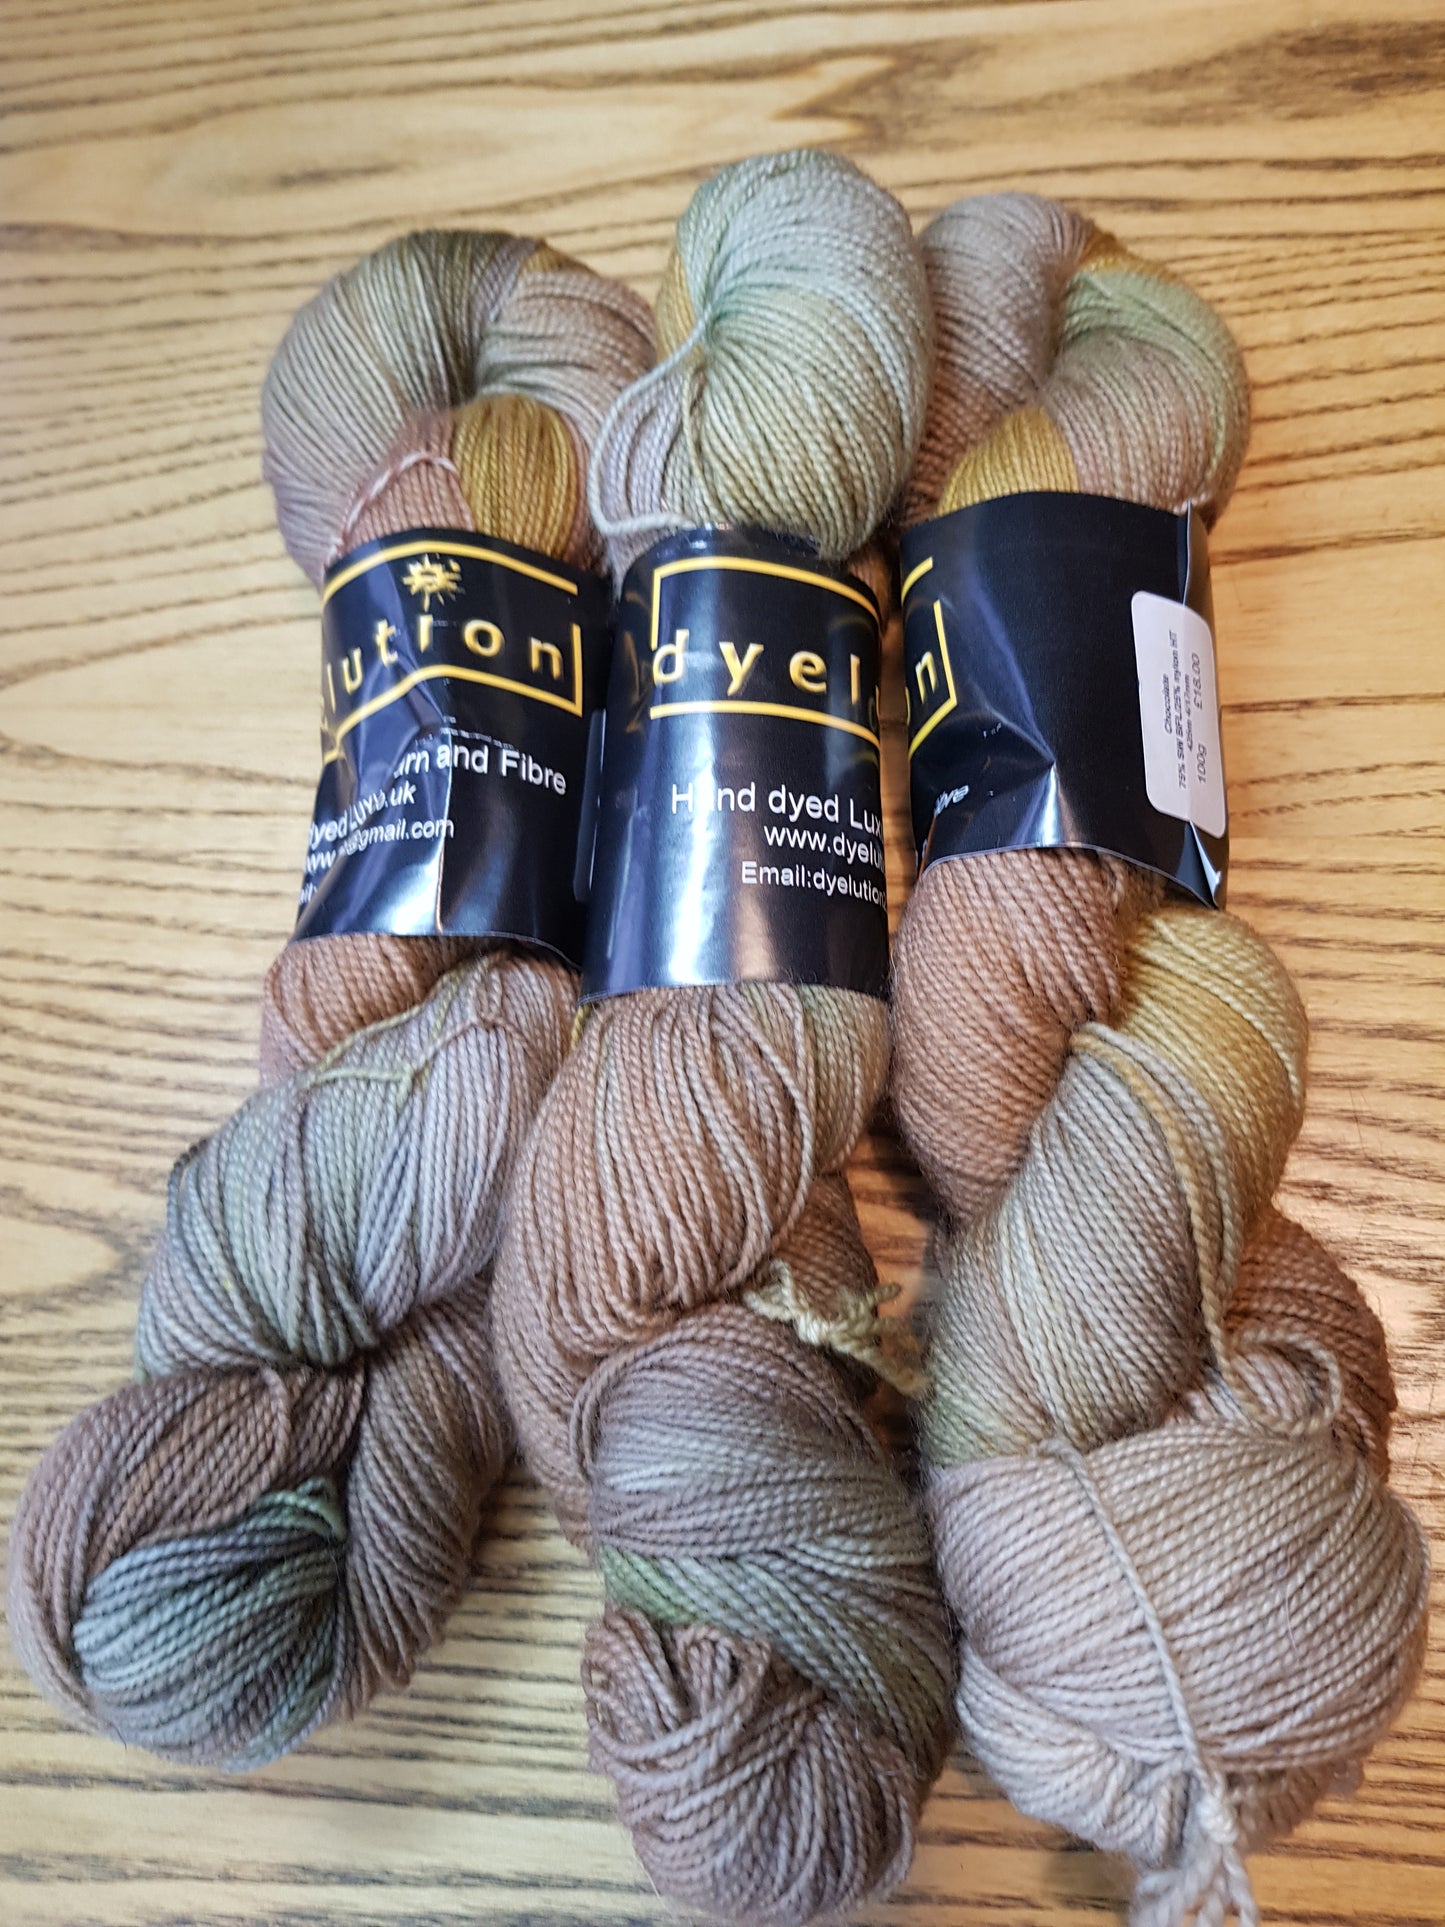 100G hand dyed Bluefaced Leicester/Nylon High Twist sock yarn - "Chocolate" - **SALE**